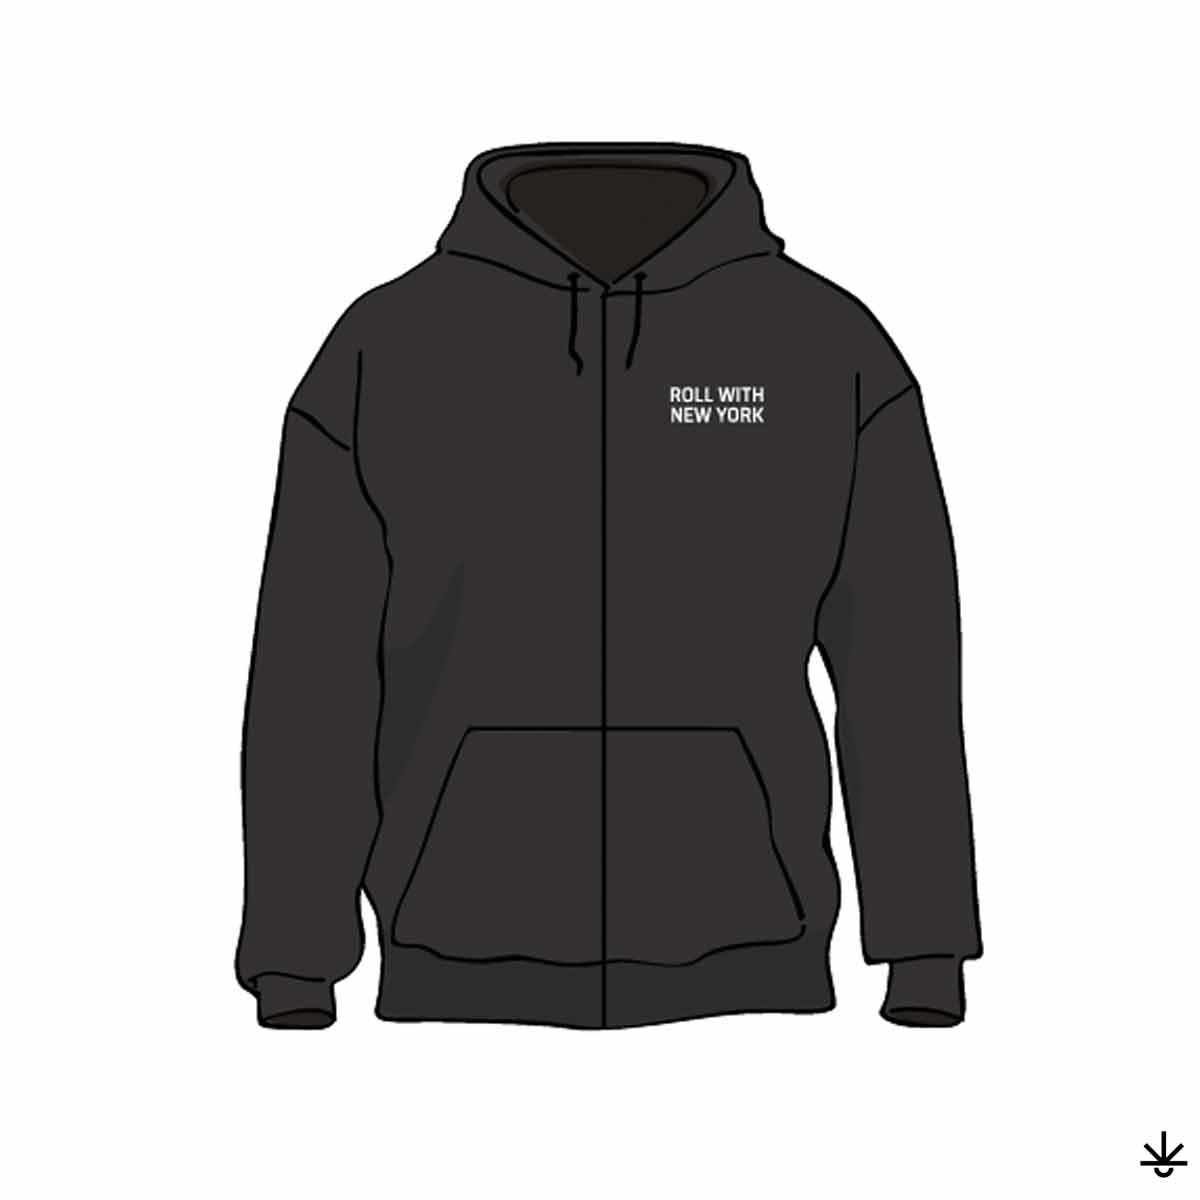 Featured image for “RWNY: Black Classic Hoodie”